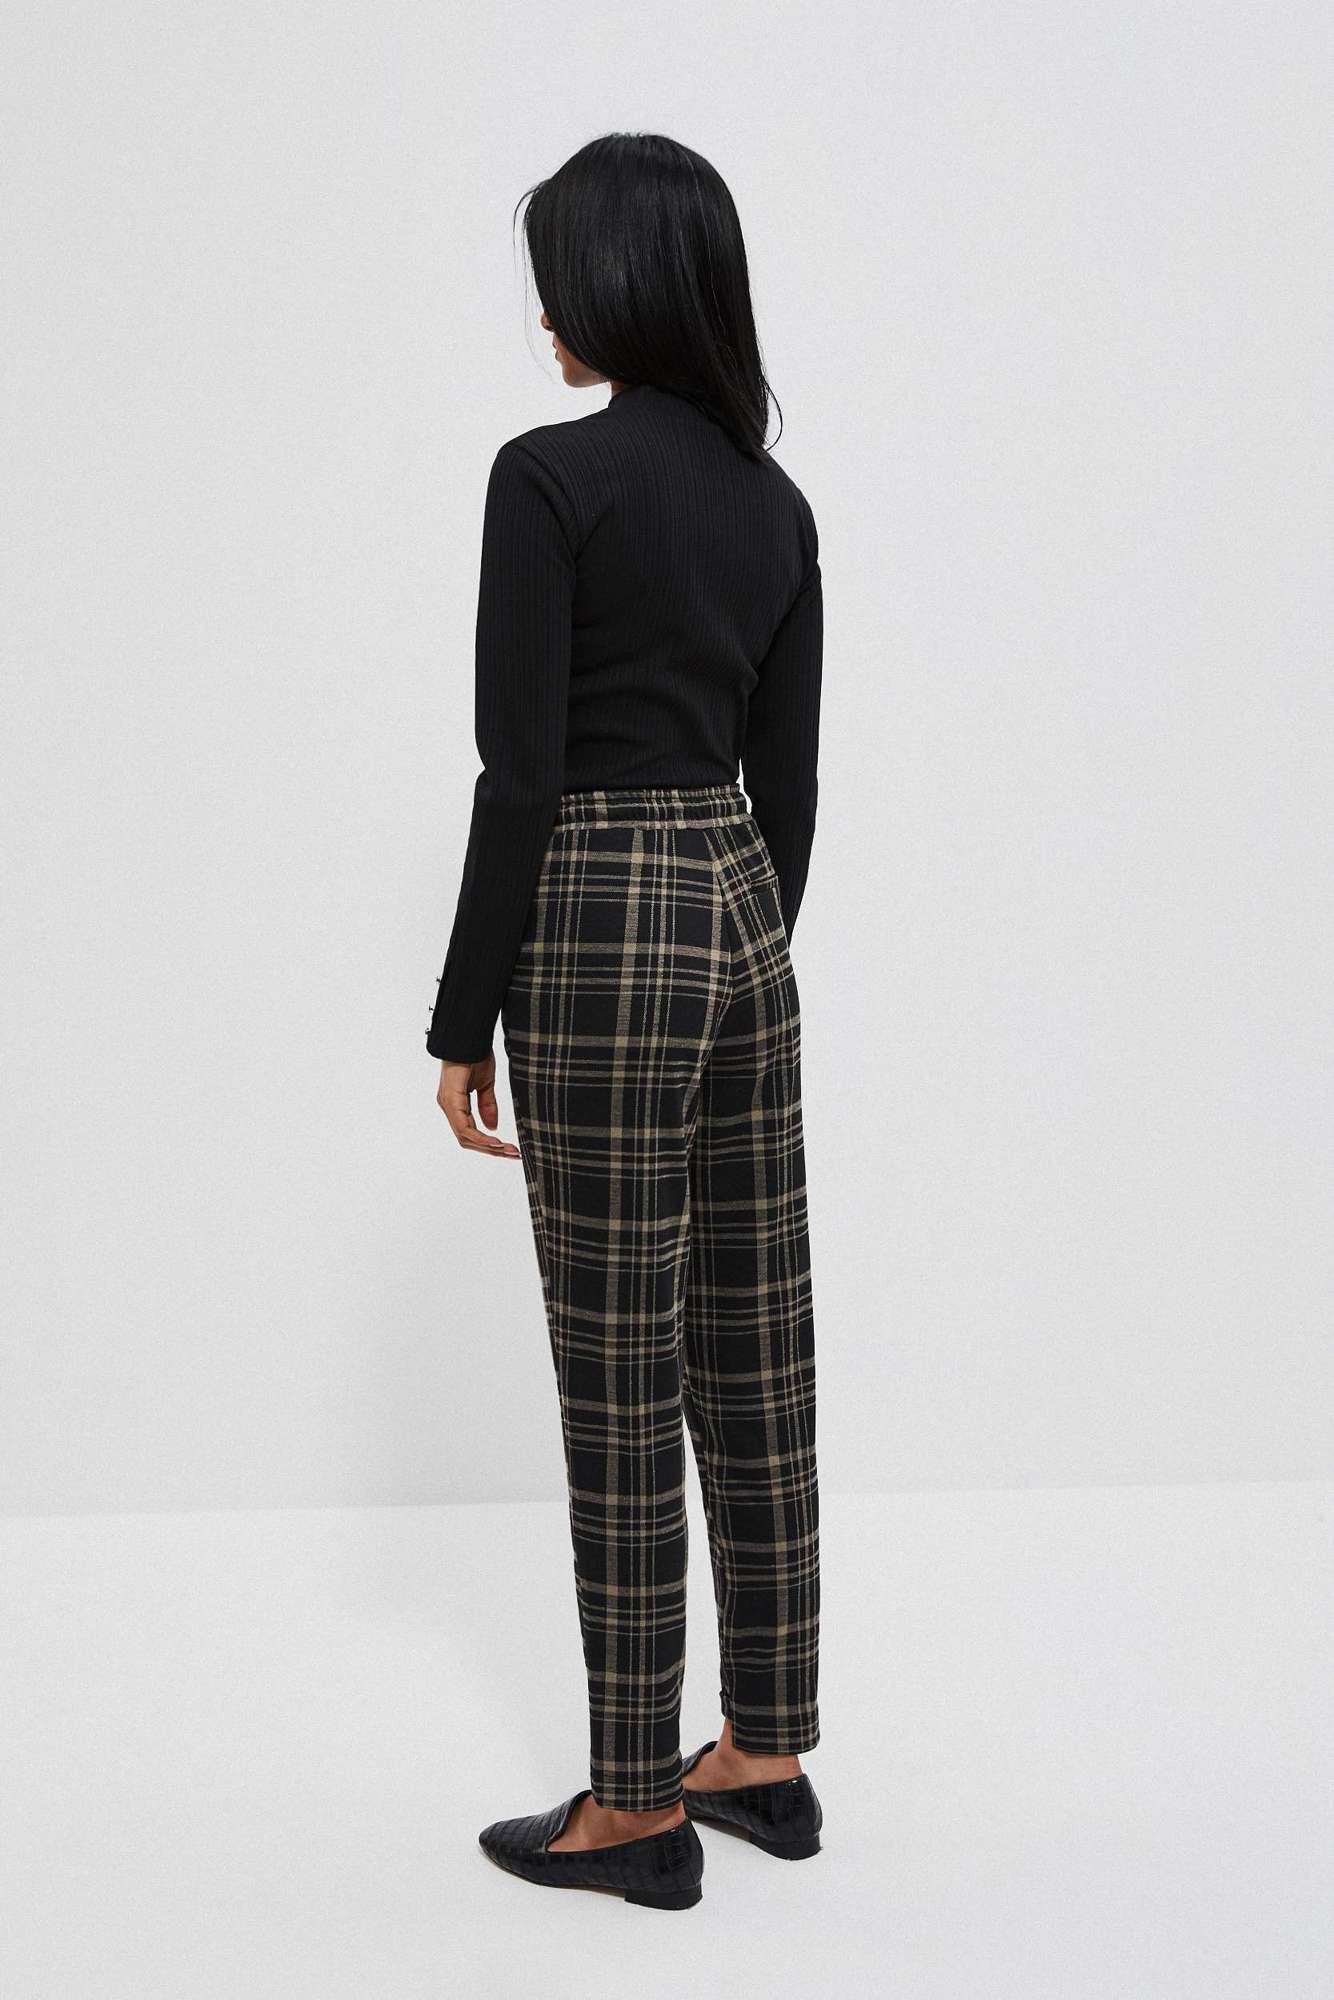 Huston PullOn Tapered Pants in Plaid